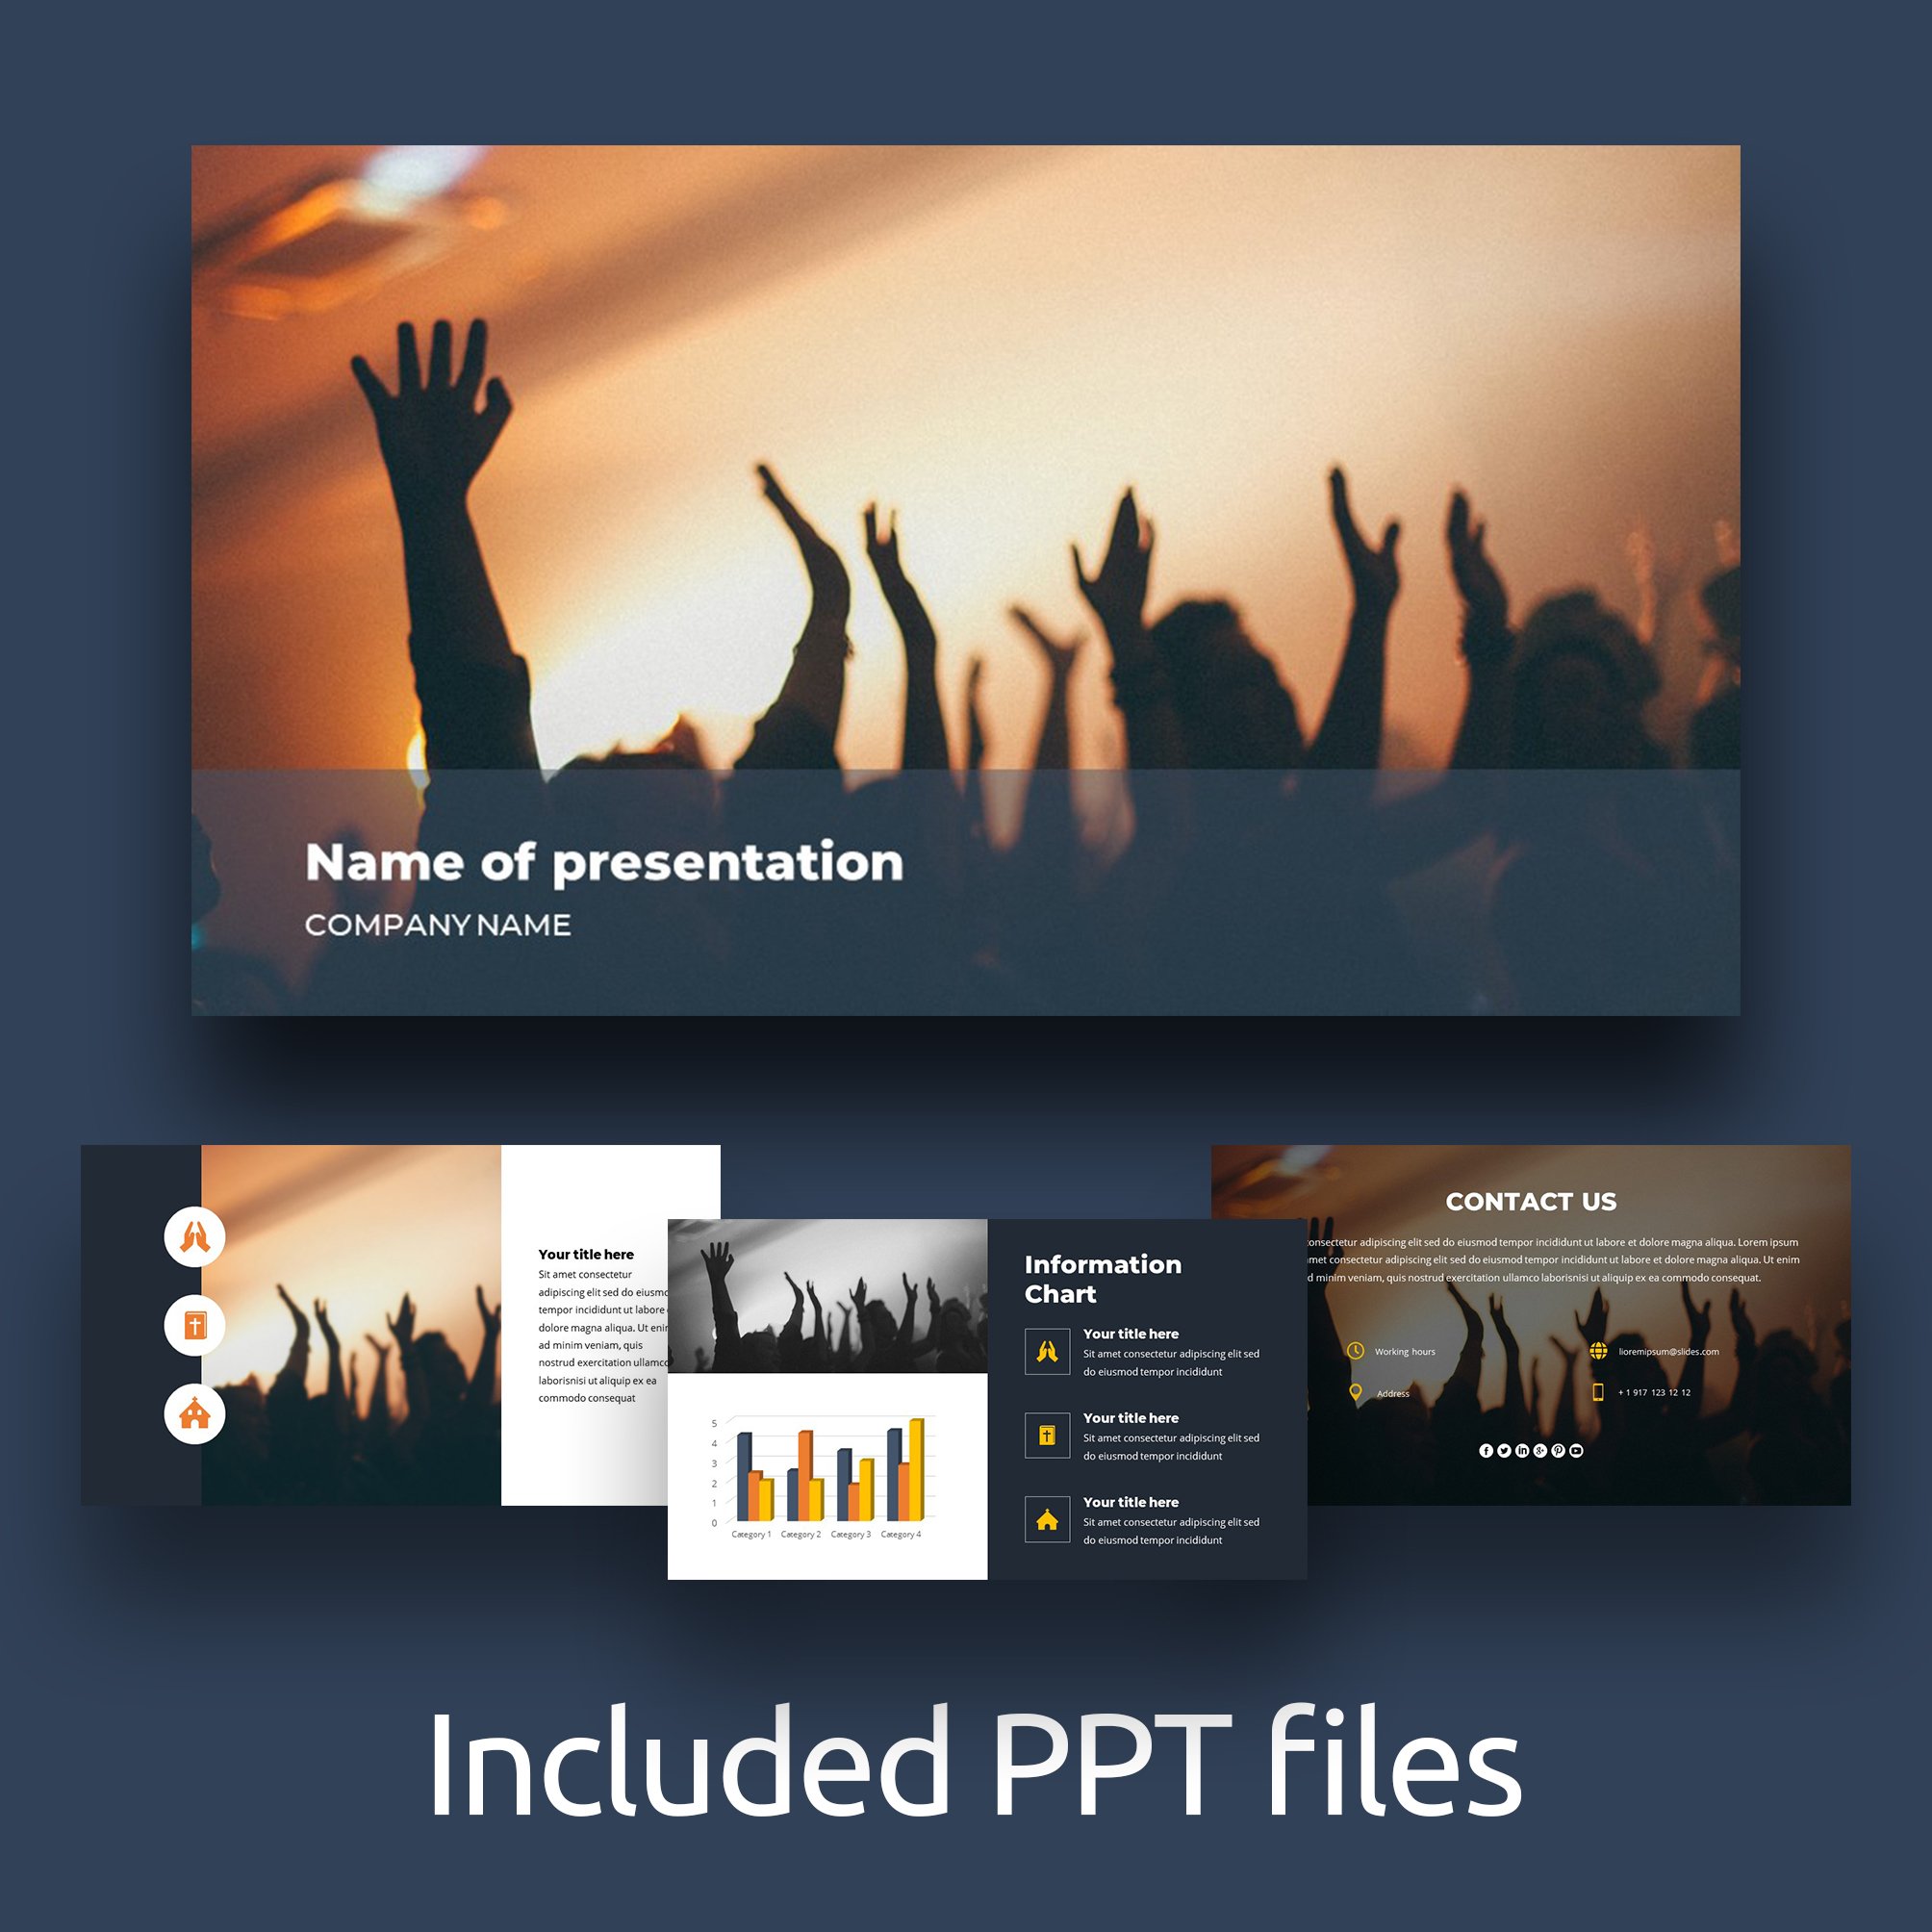 4 Free Praise and Worship Powerpoint Background Slides (PPTX) - Soul